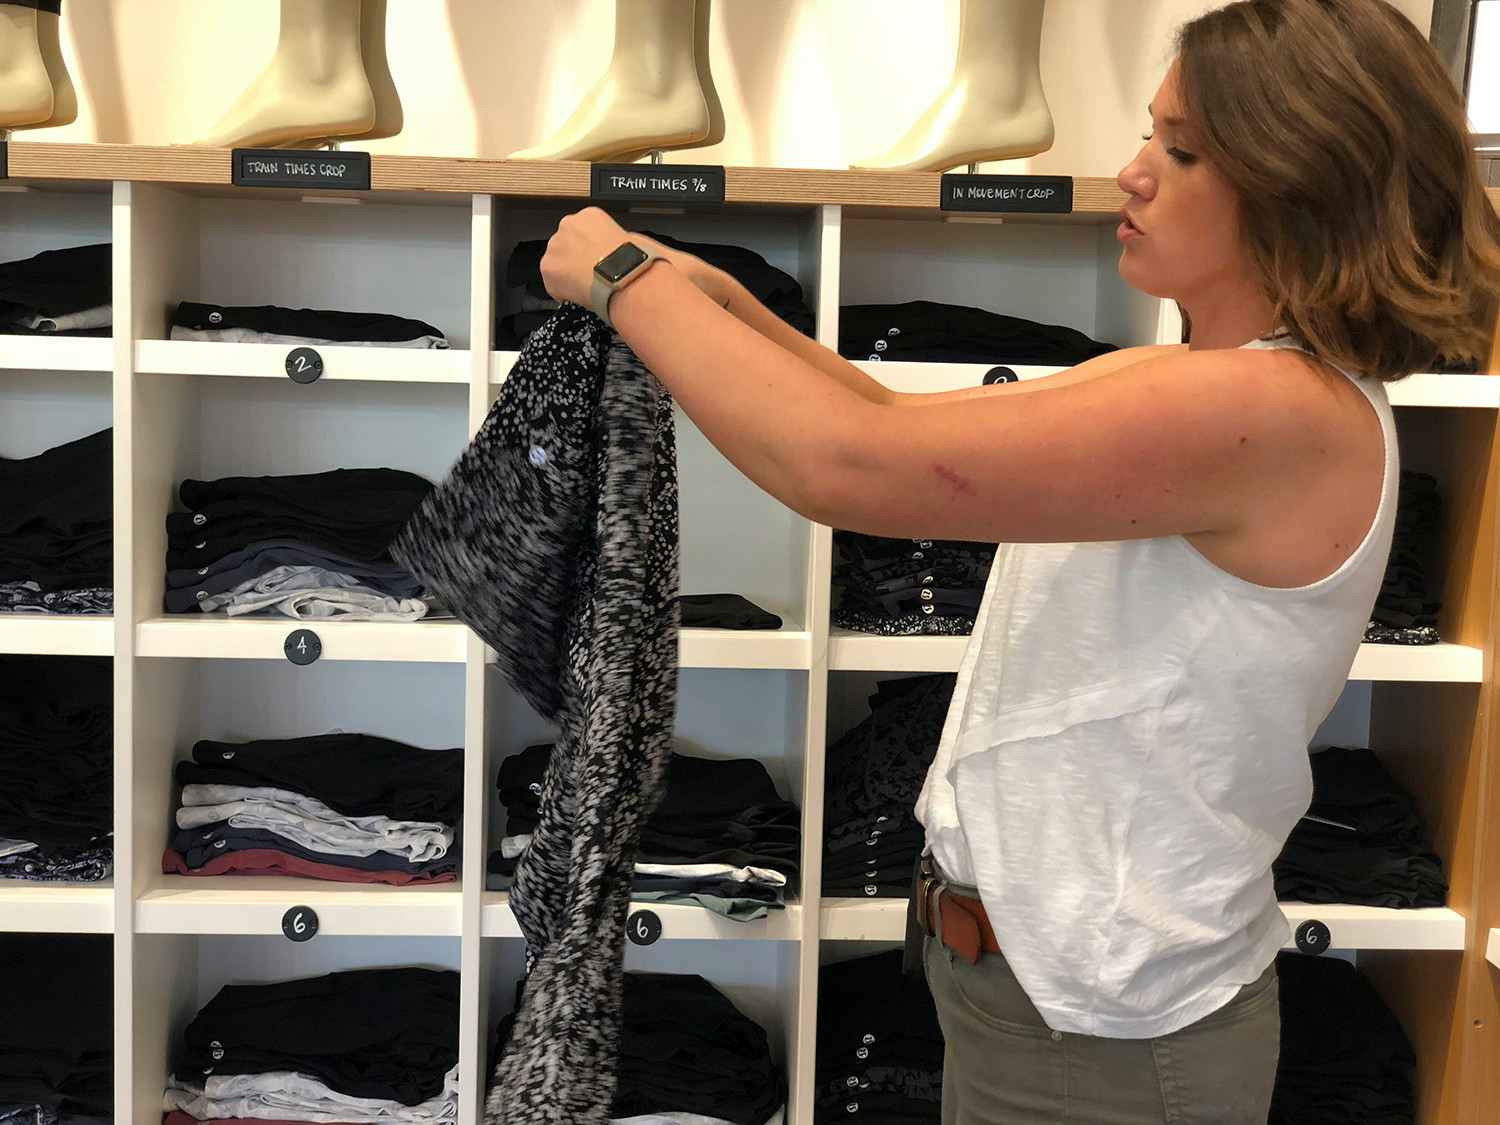 24 lululemon Hacks That Will Save You Money - The Krazy Coupon Lady